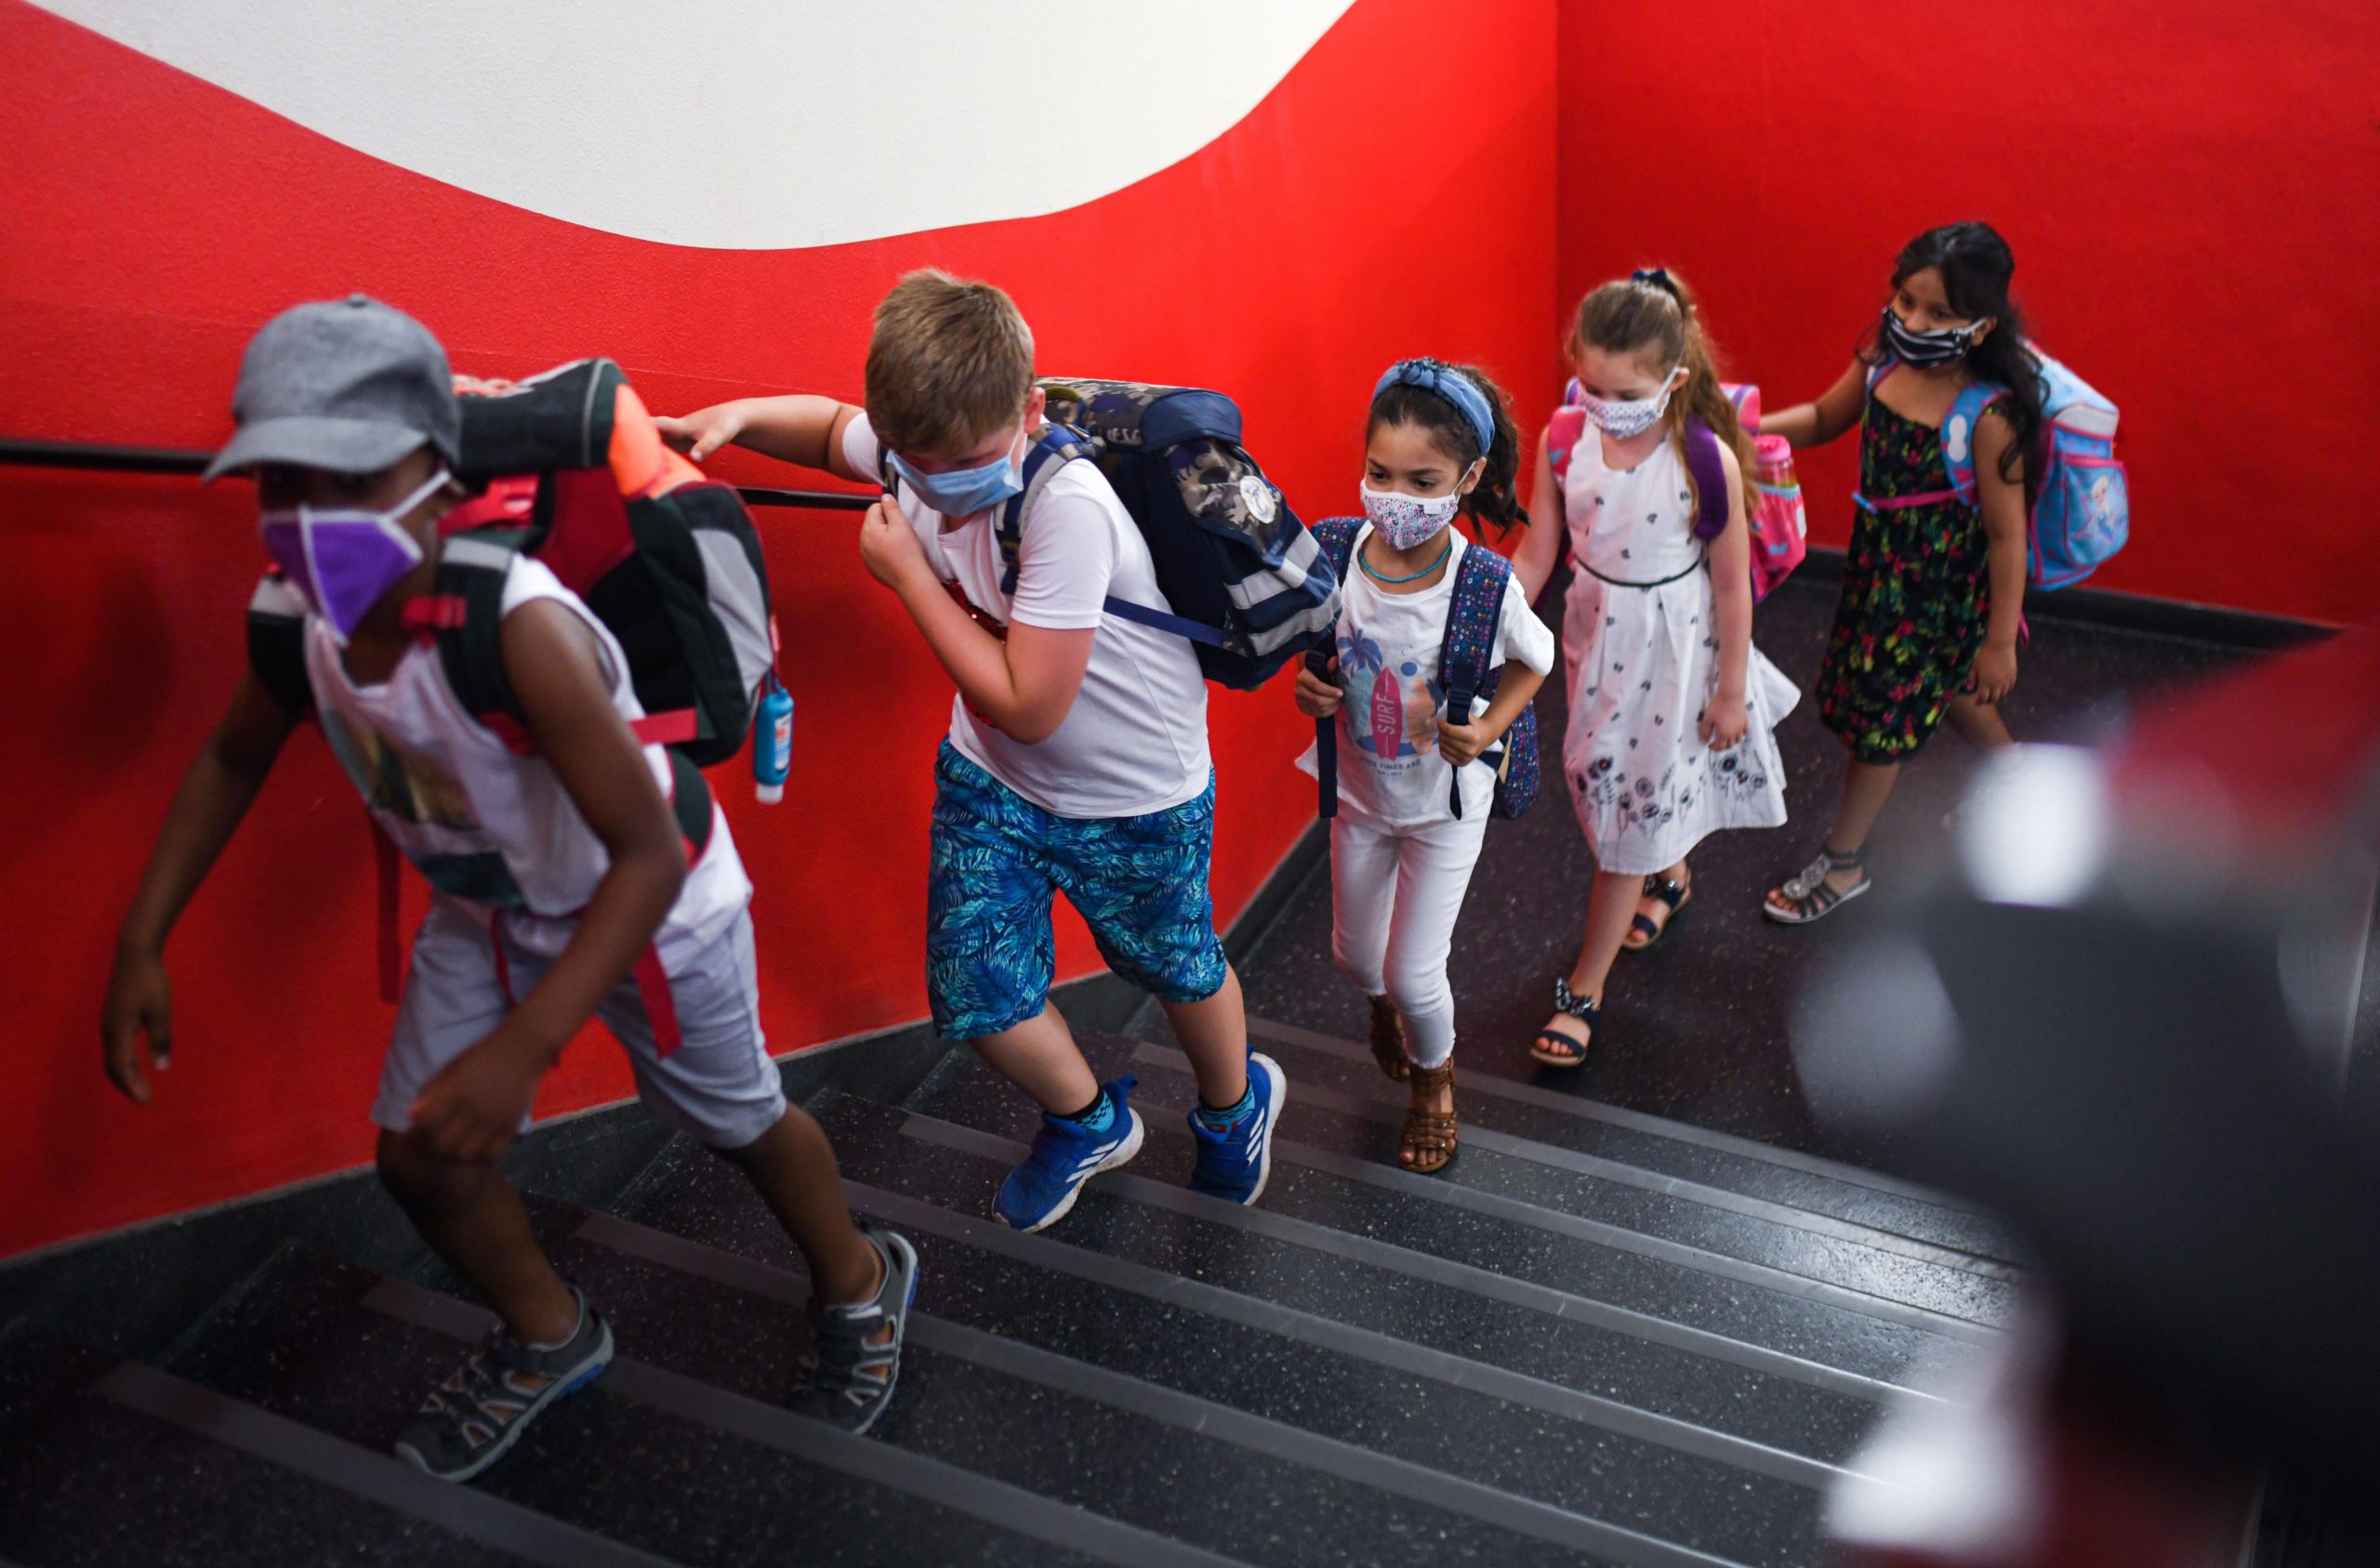 Students in hallway wearing masks